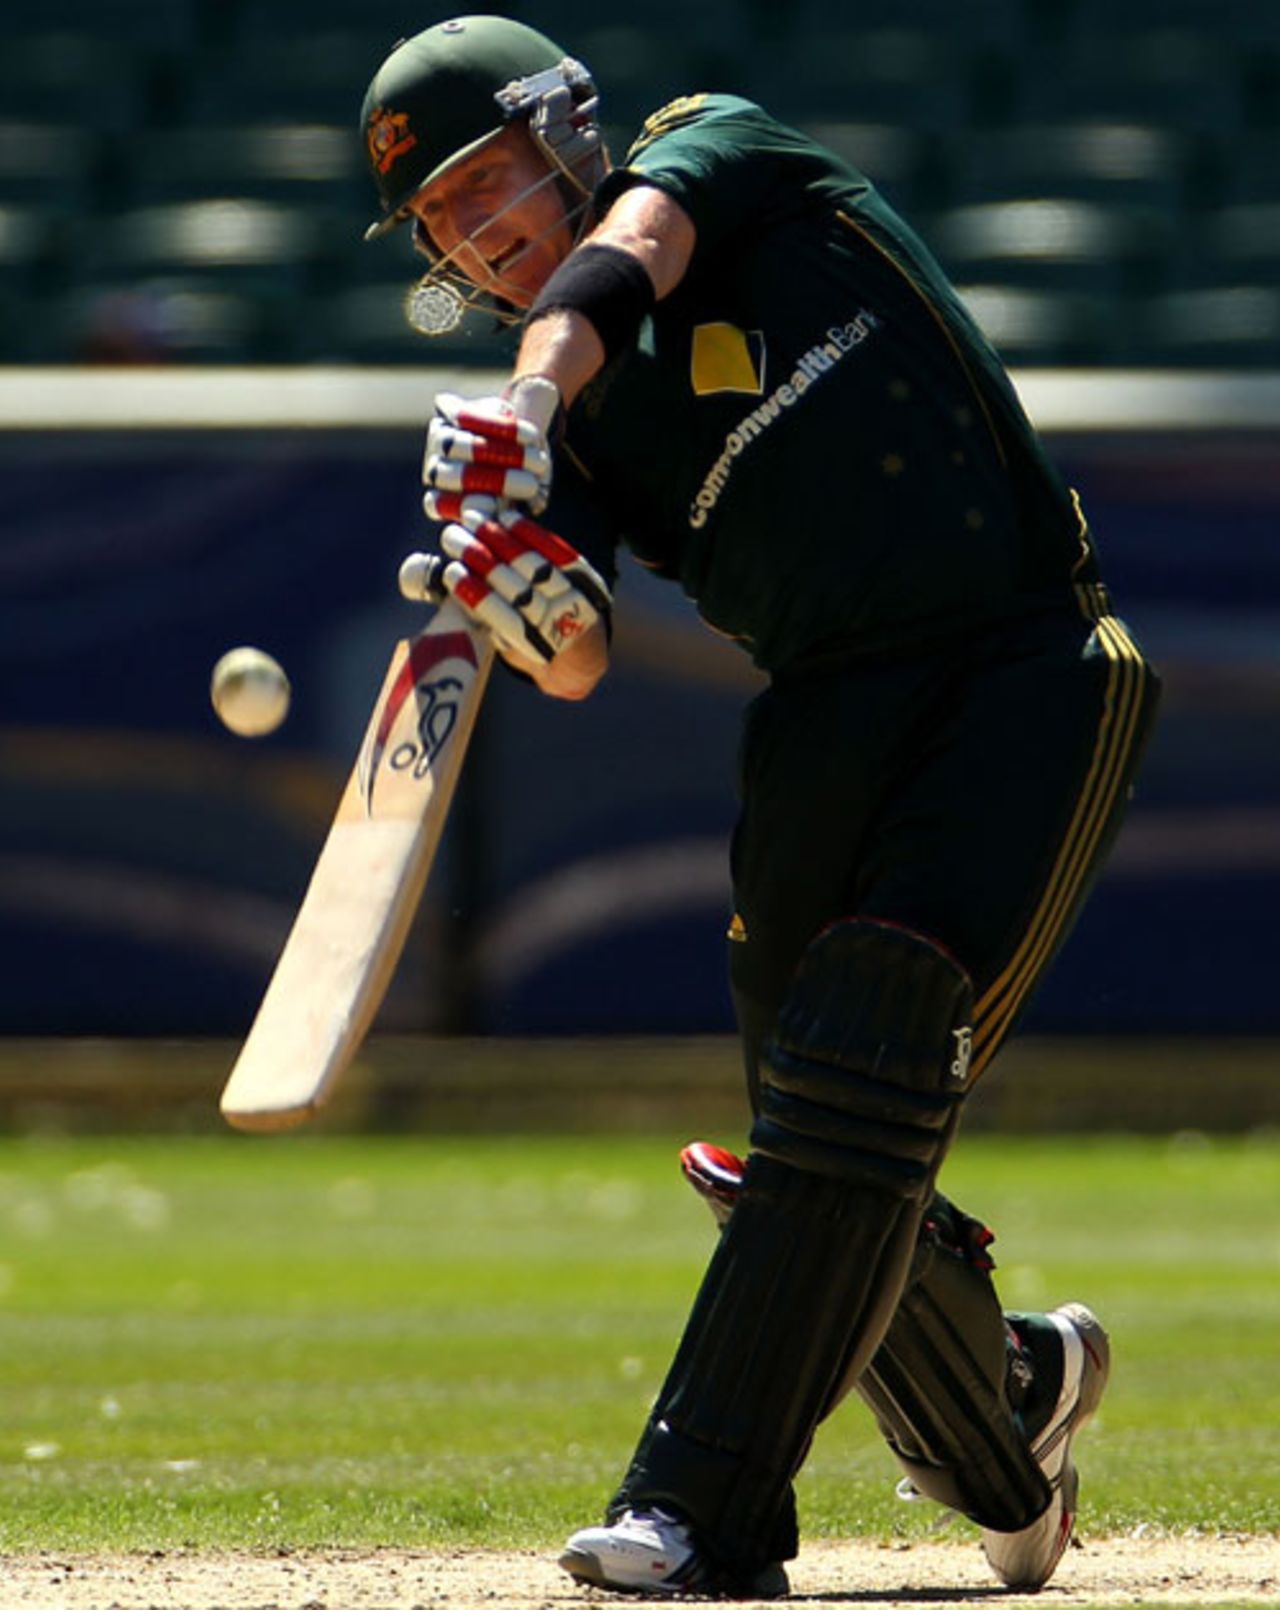 Brad Haddin hit two sixes in his 32, Australia v West Indies, 5th ODI, Melbourne, 19 February, 2010